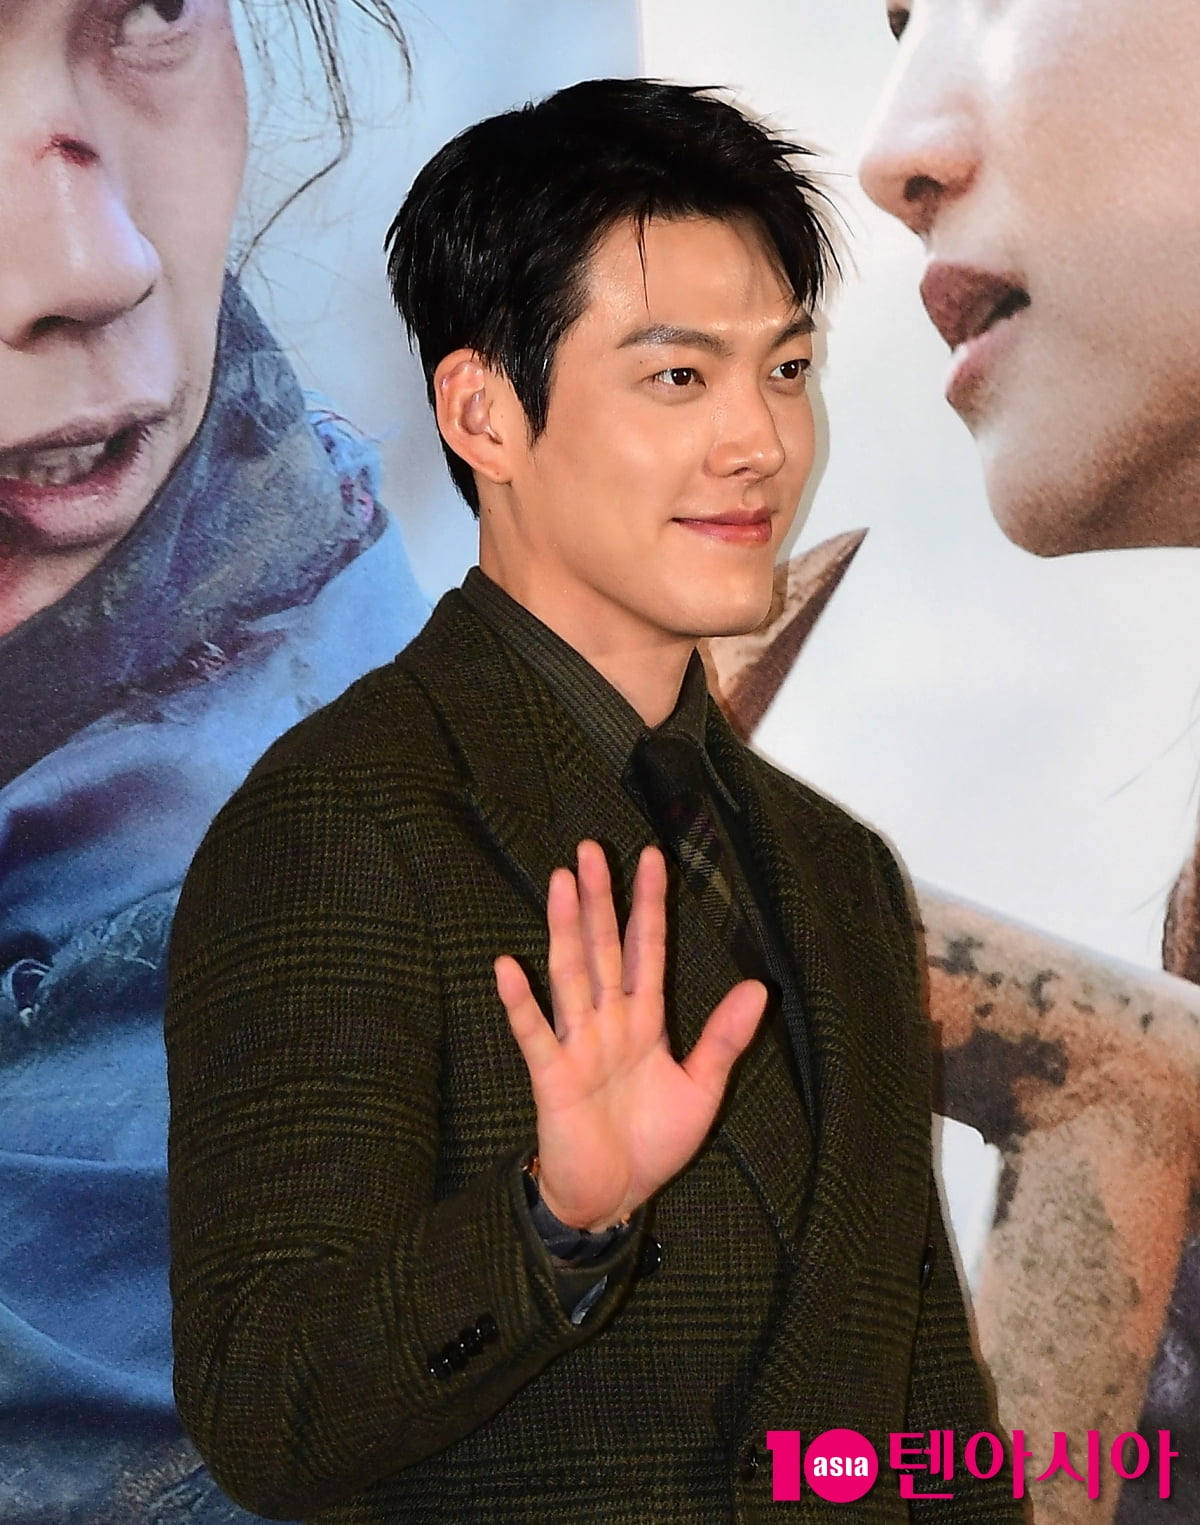 ‘Kongkong red bean’ farming is a warm-up... Kim Woo-bin, ‘Aliens + Humans’ Part 2 → ‘It will all come true’, wide-ranging move